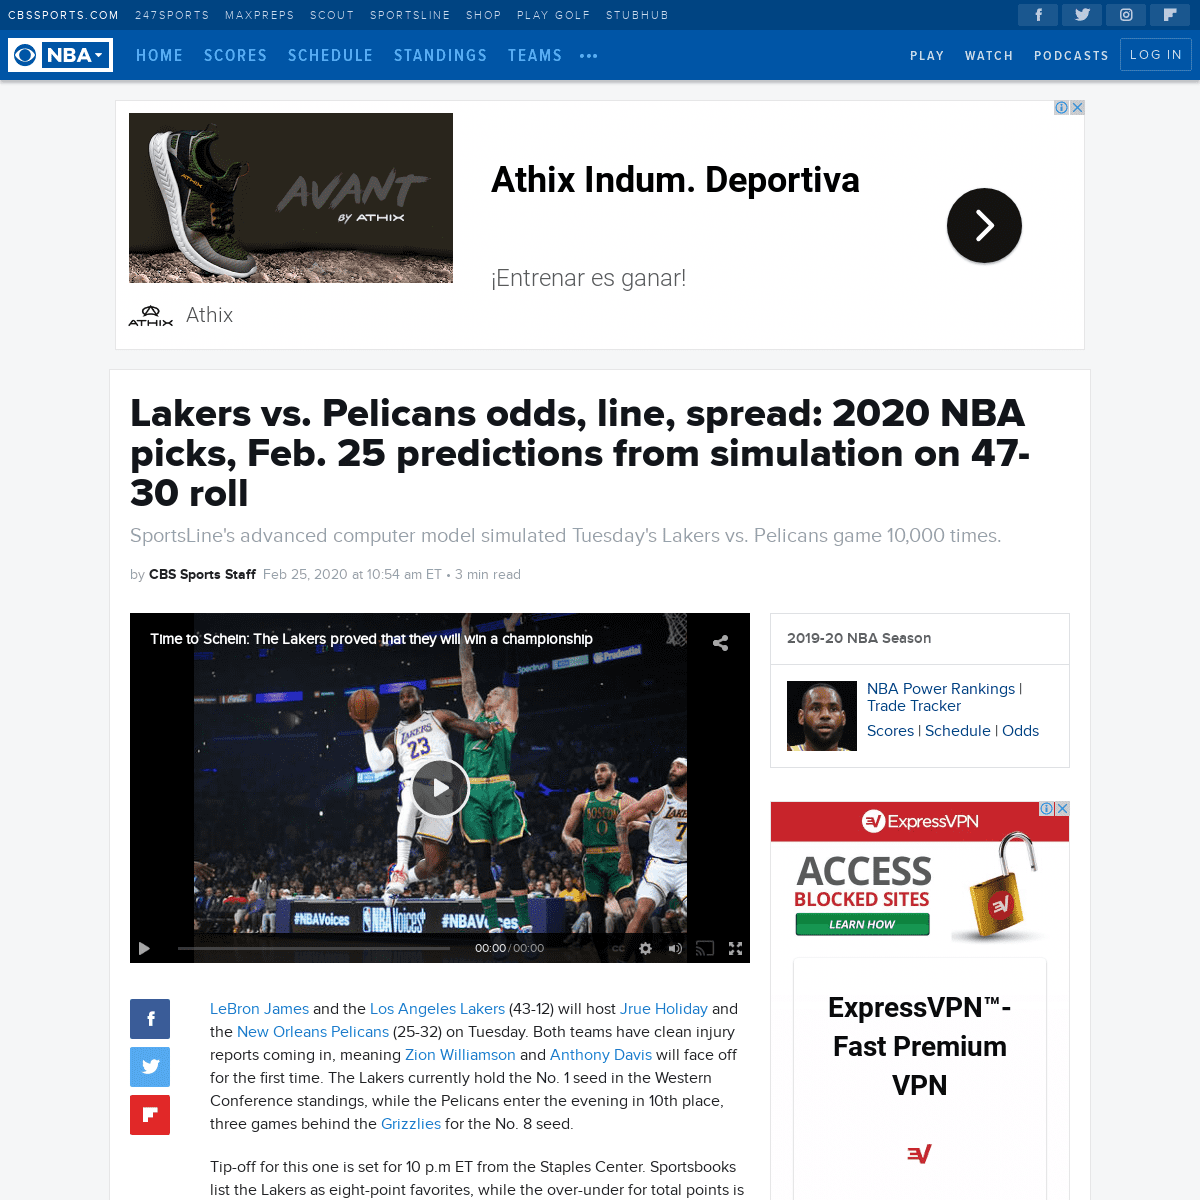 A complete backup of www.cbssports.com/nba/news/lakers-vs-pelicans-odds-line-spread-2020-nba-picks-feb-25-predictions-from-simul